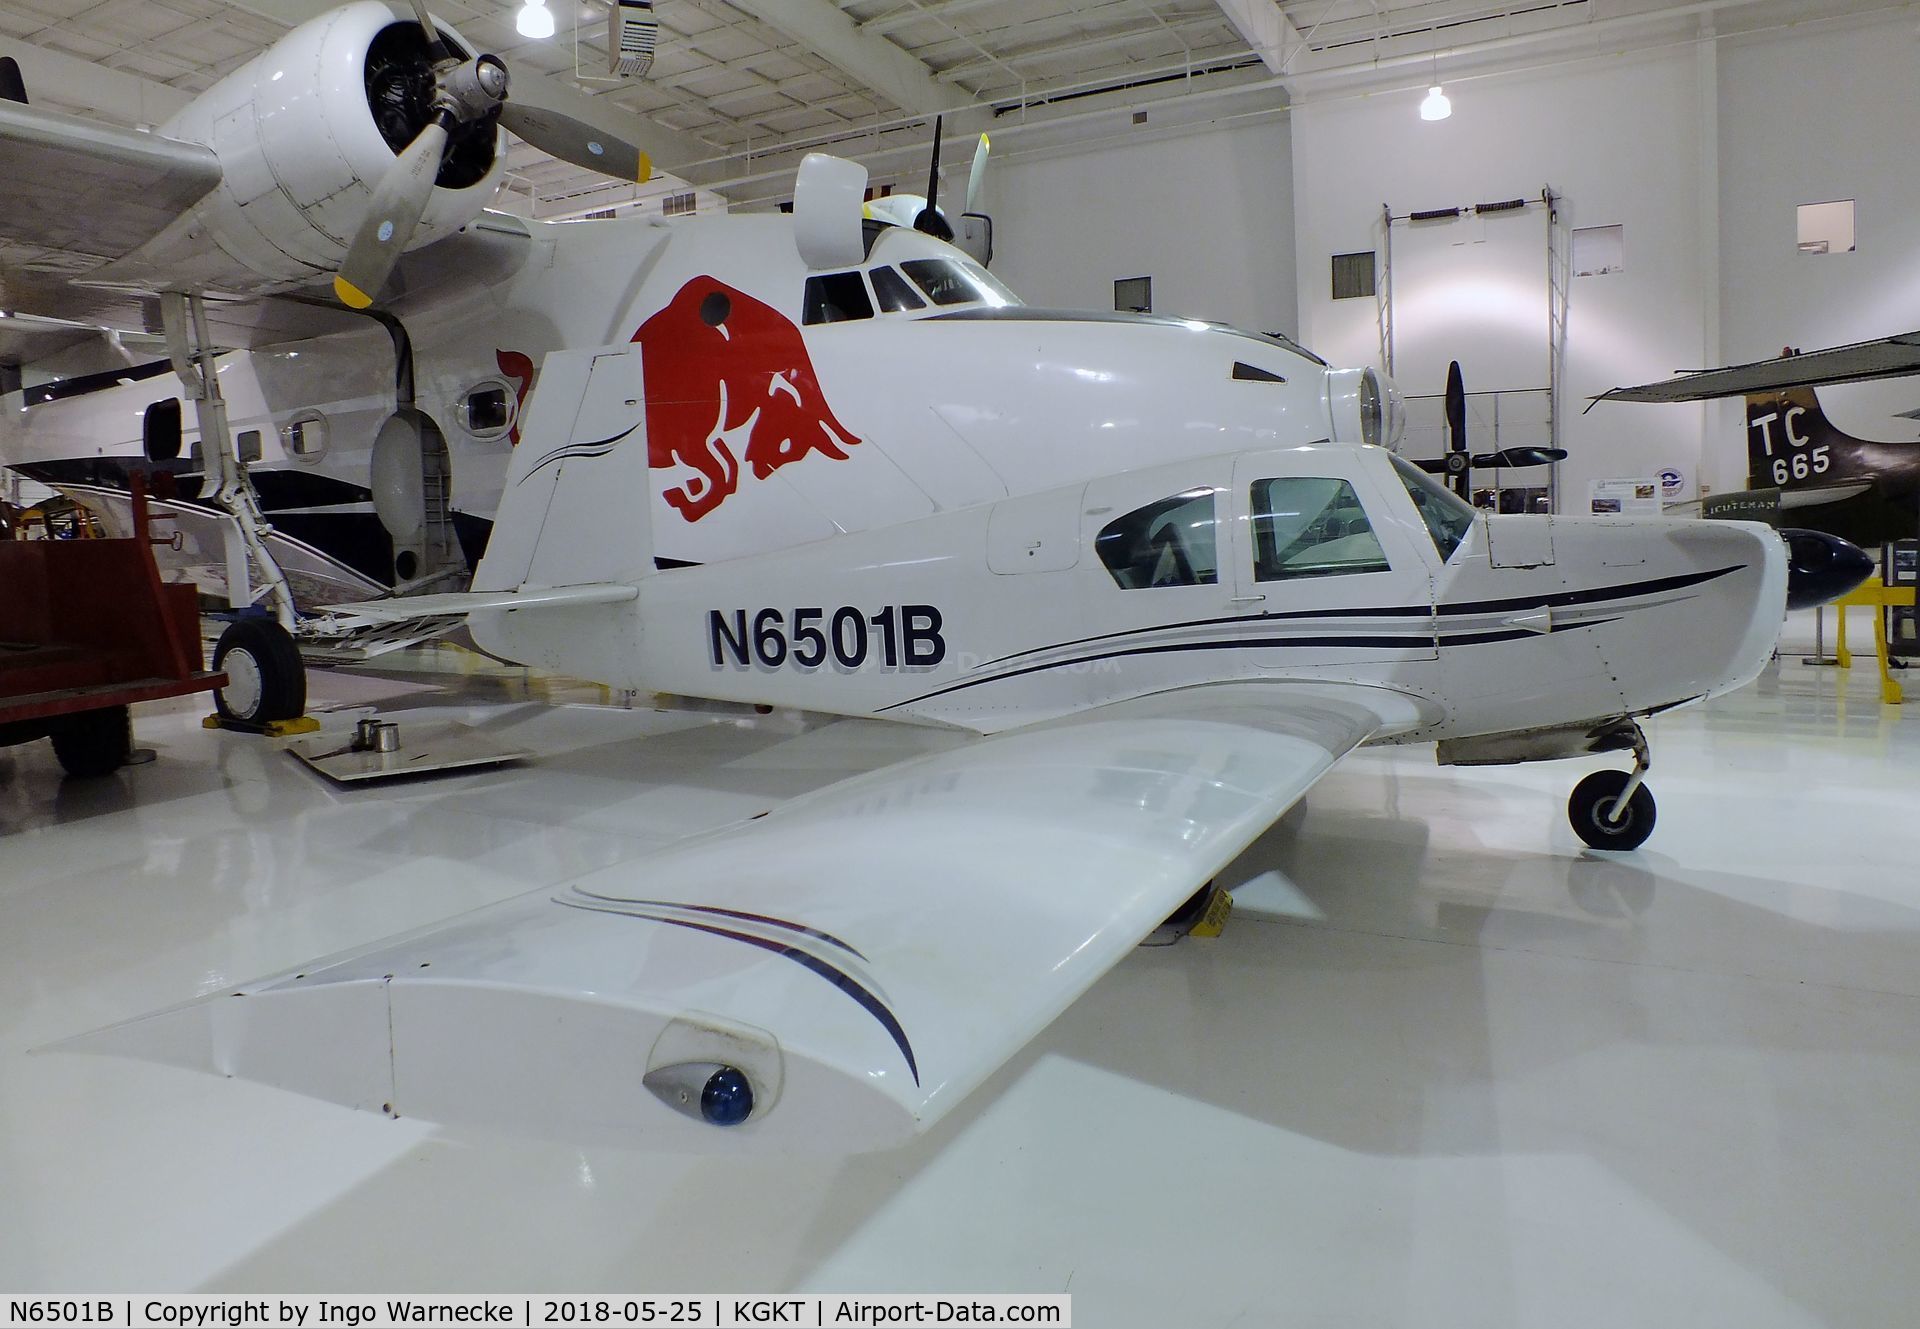 N6501B, 1957 Mooney M20 C/N 1168, Mooney M20 (minus propeller) at the Tennessee Museum of Aviation, Sevierville TN